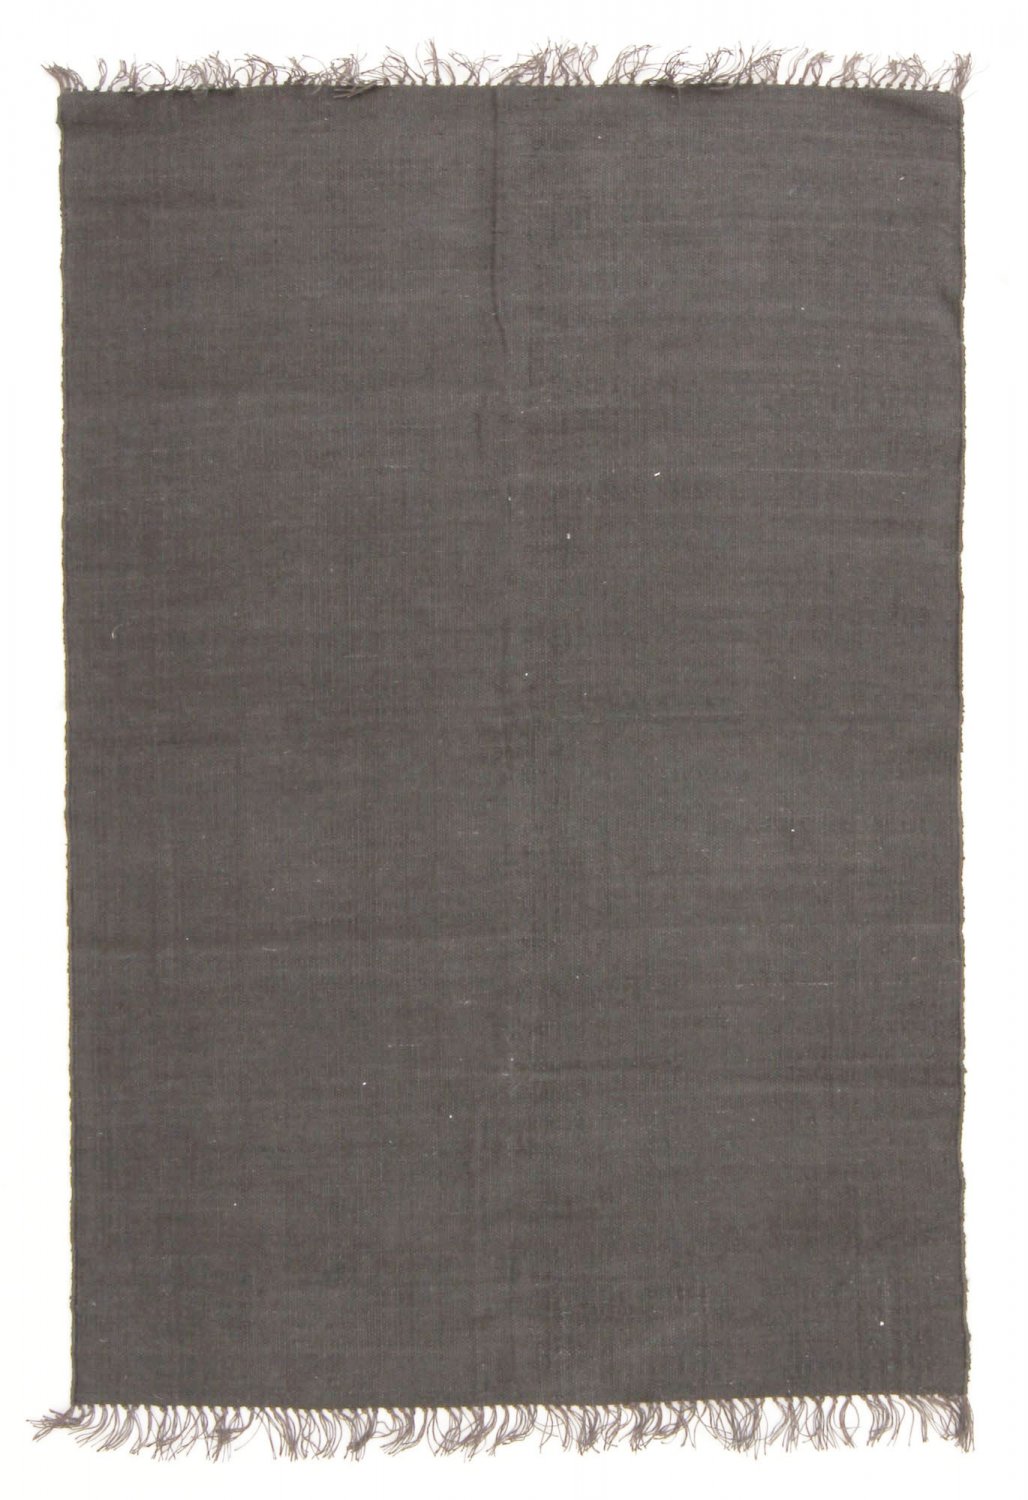 Tapis chanvre - Mexicali (anthracite)